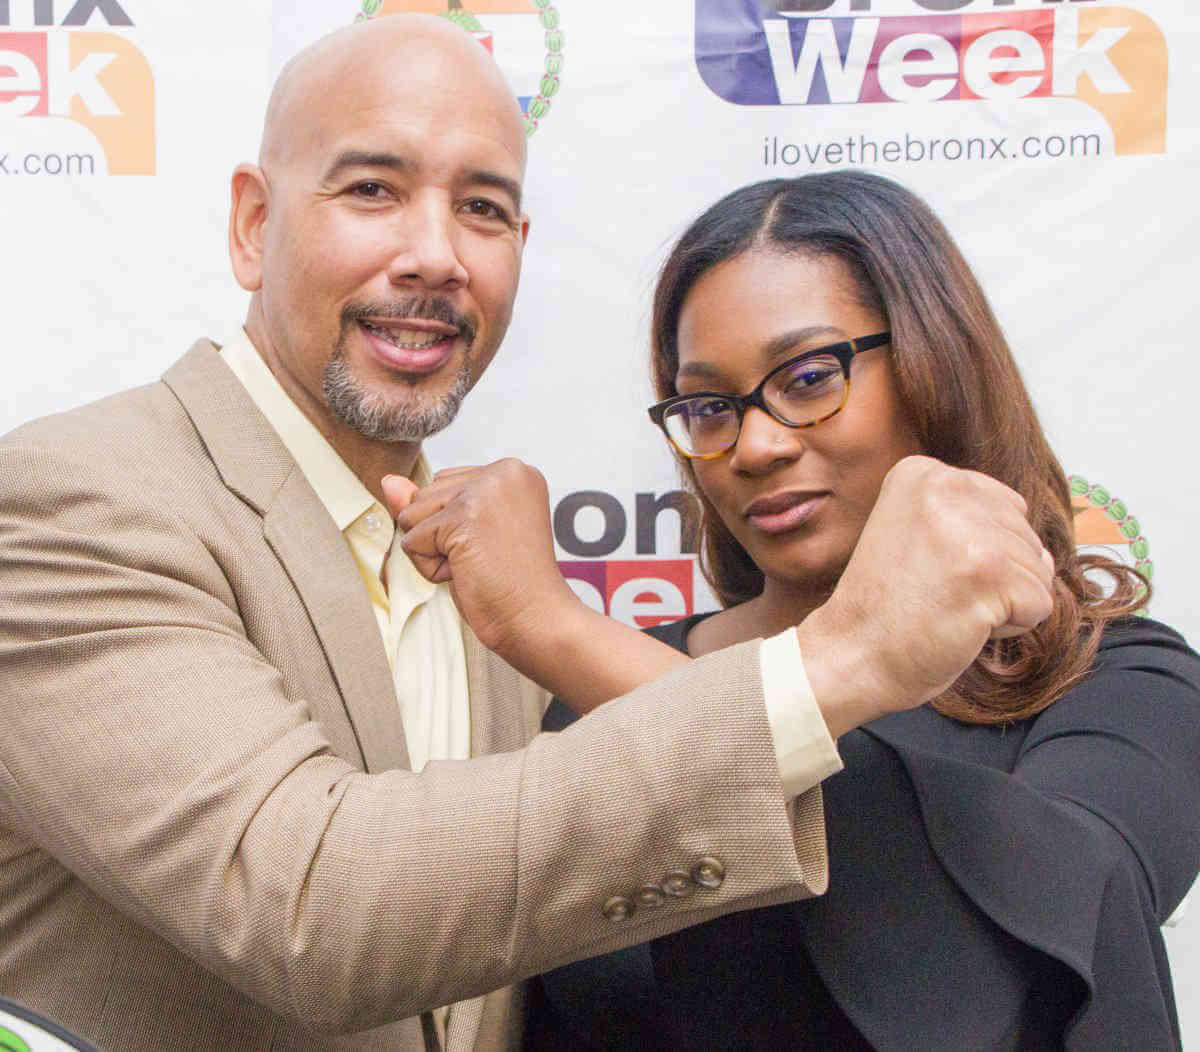 Bronx Week 2019 to honor three; events planned May 9 to May 19|Bronx Week 2019 to honor three; events planned May 9 to May 19|Bronx Week 2019 to honor three; events planned May 9 to May 19|Bronx Week 2019 to honor three; events planned May 9 to May 19|Bronx Week 2019 to honor three; events planned May 9 to May 19